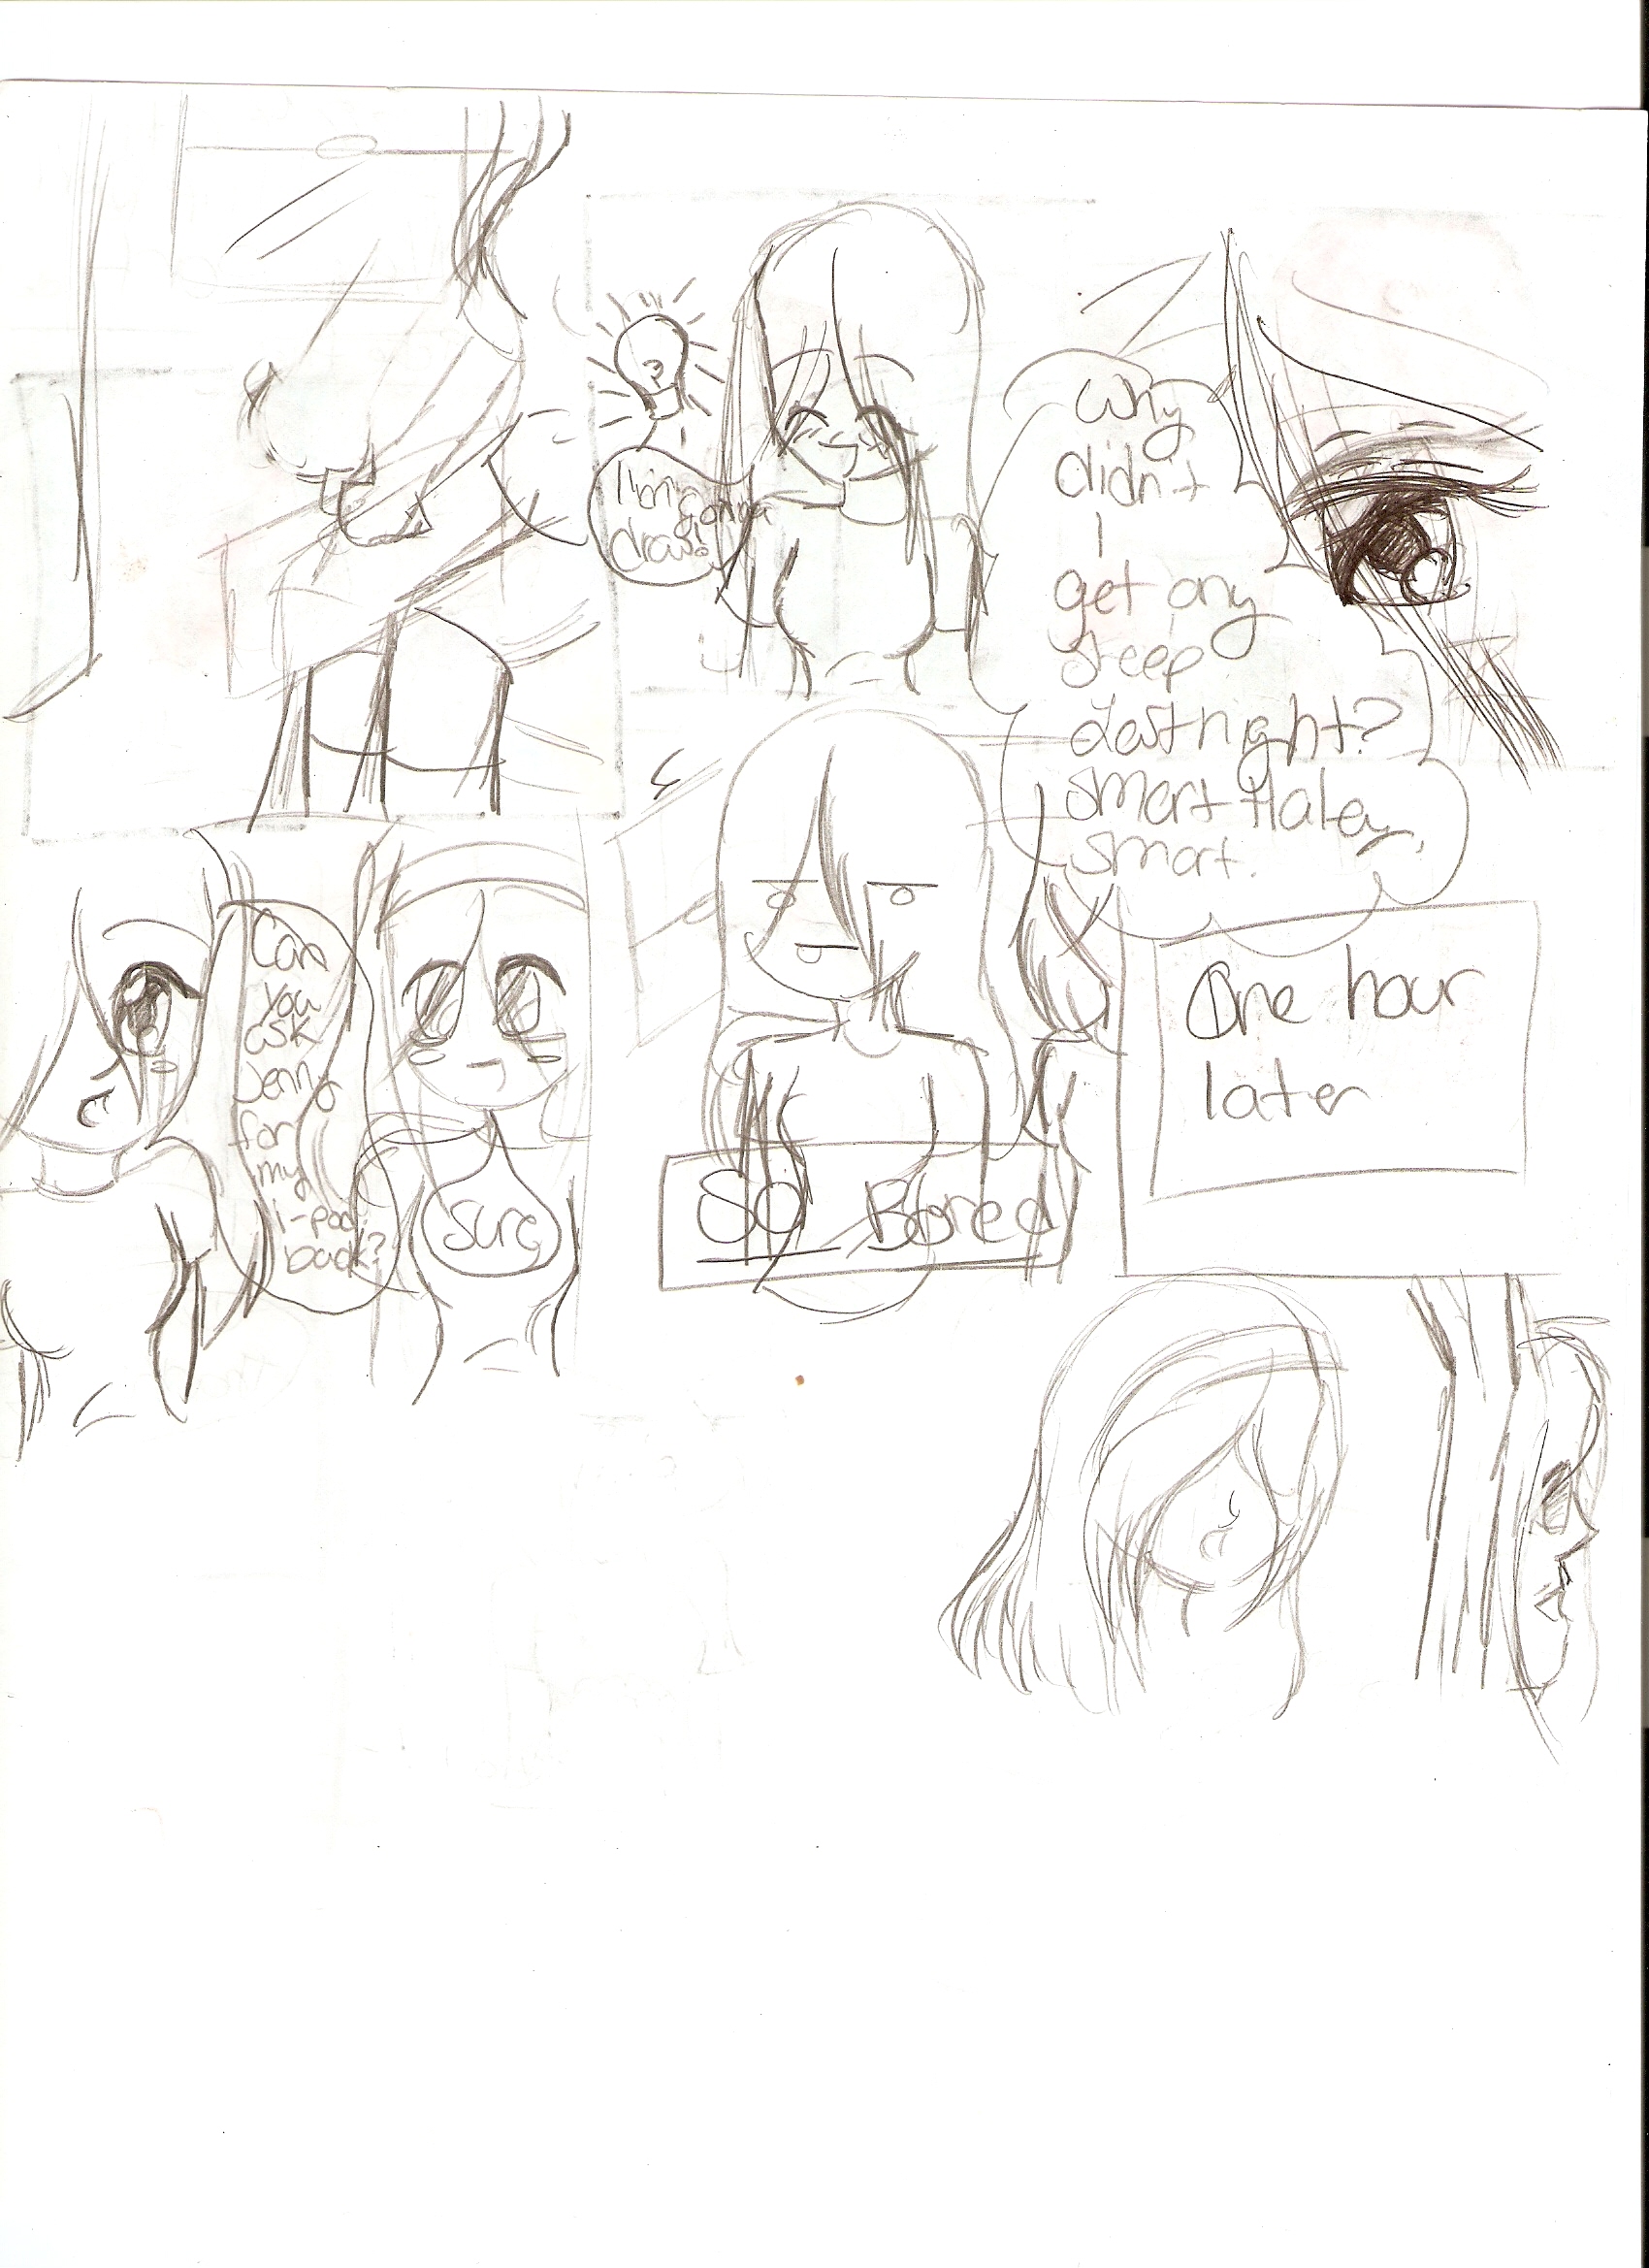 Page two of the feild trip stories by KiaraAkira